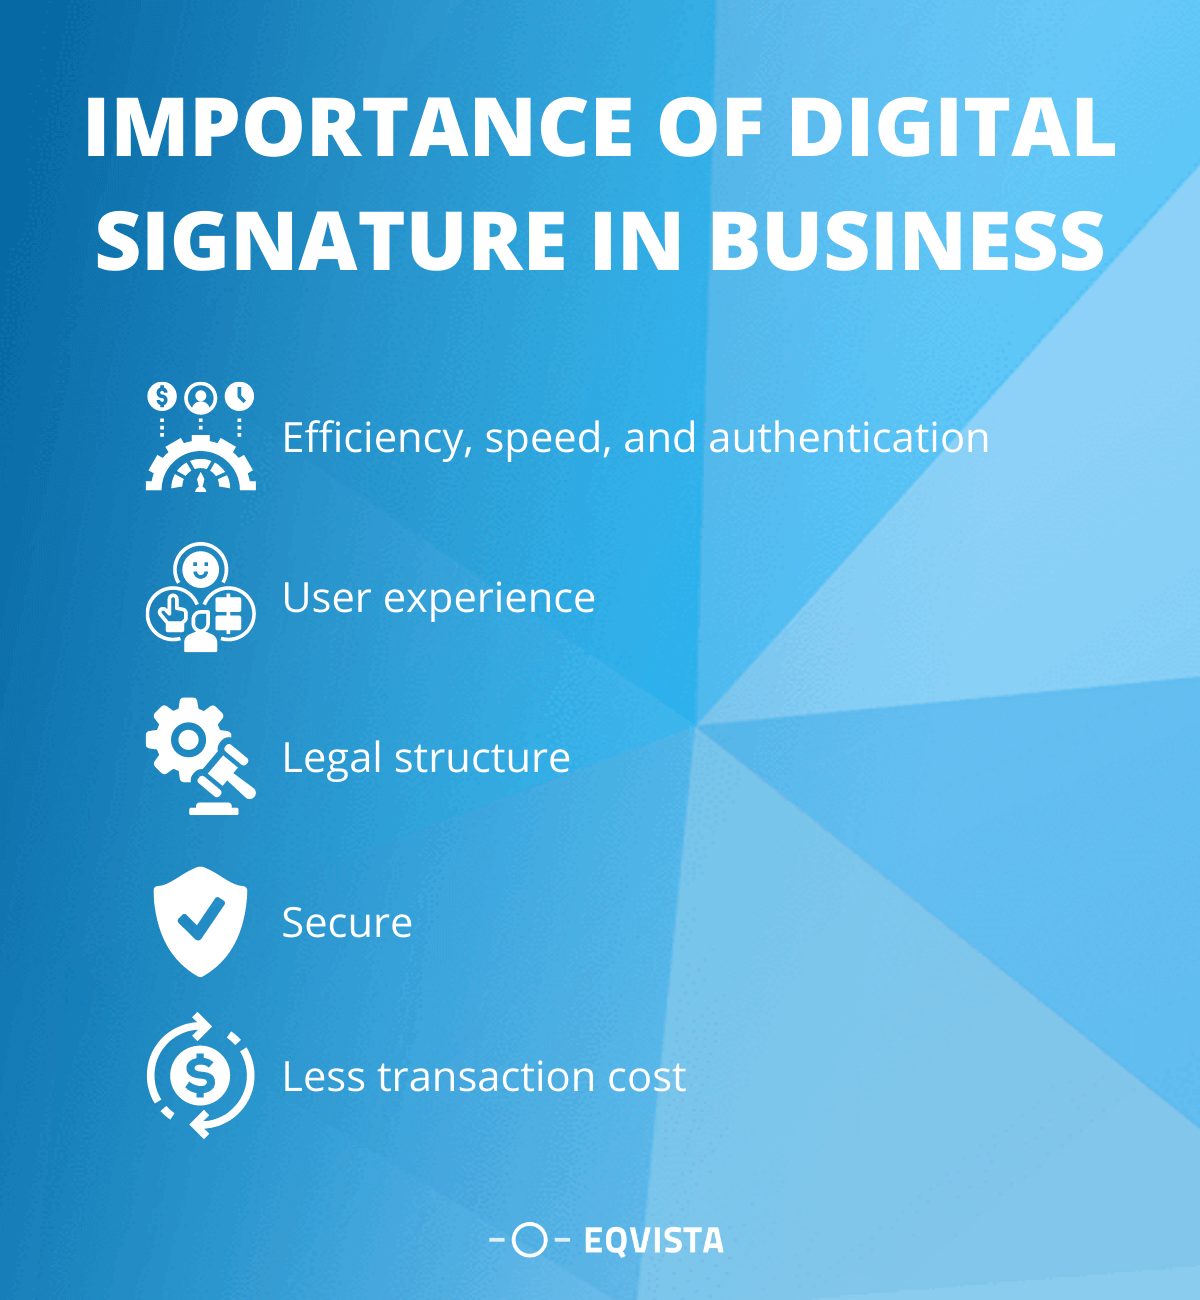 Importance of digital signature in business